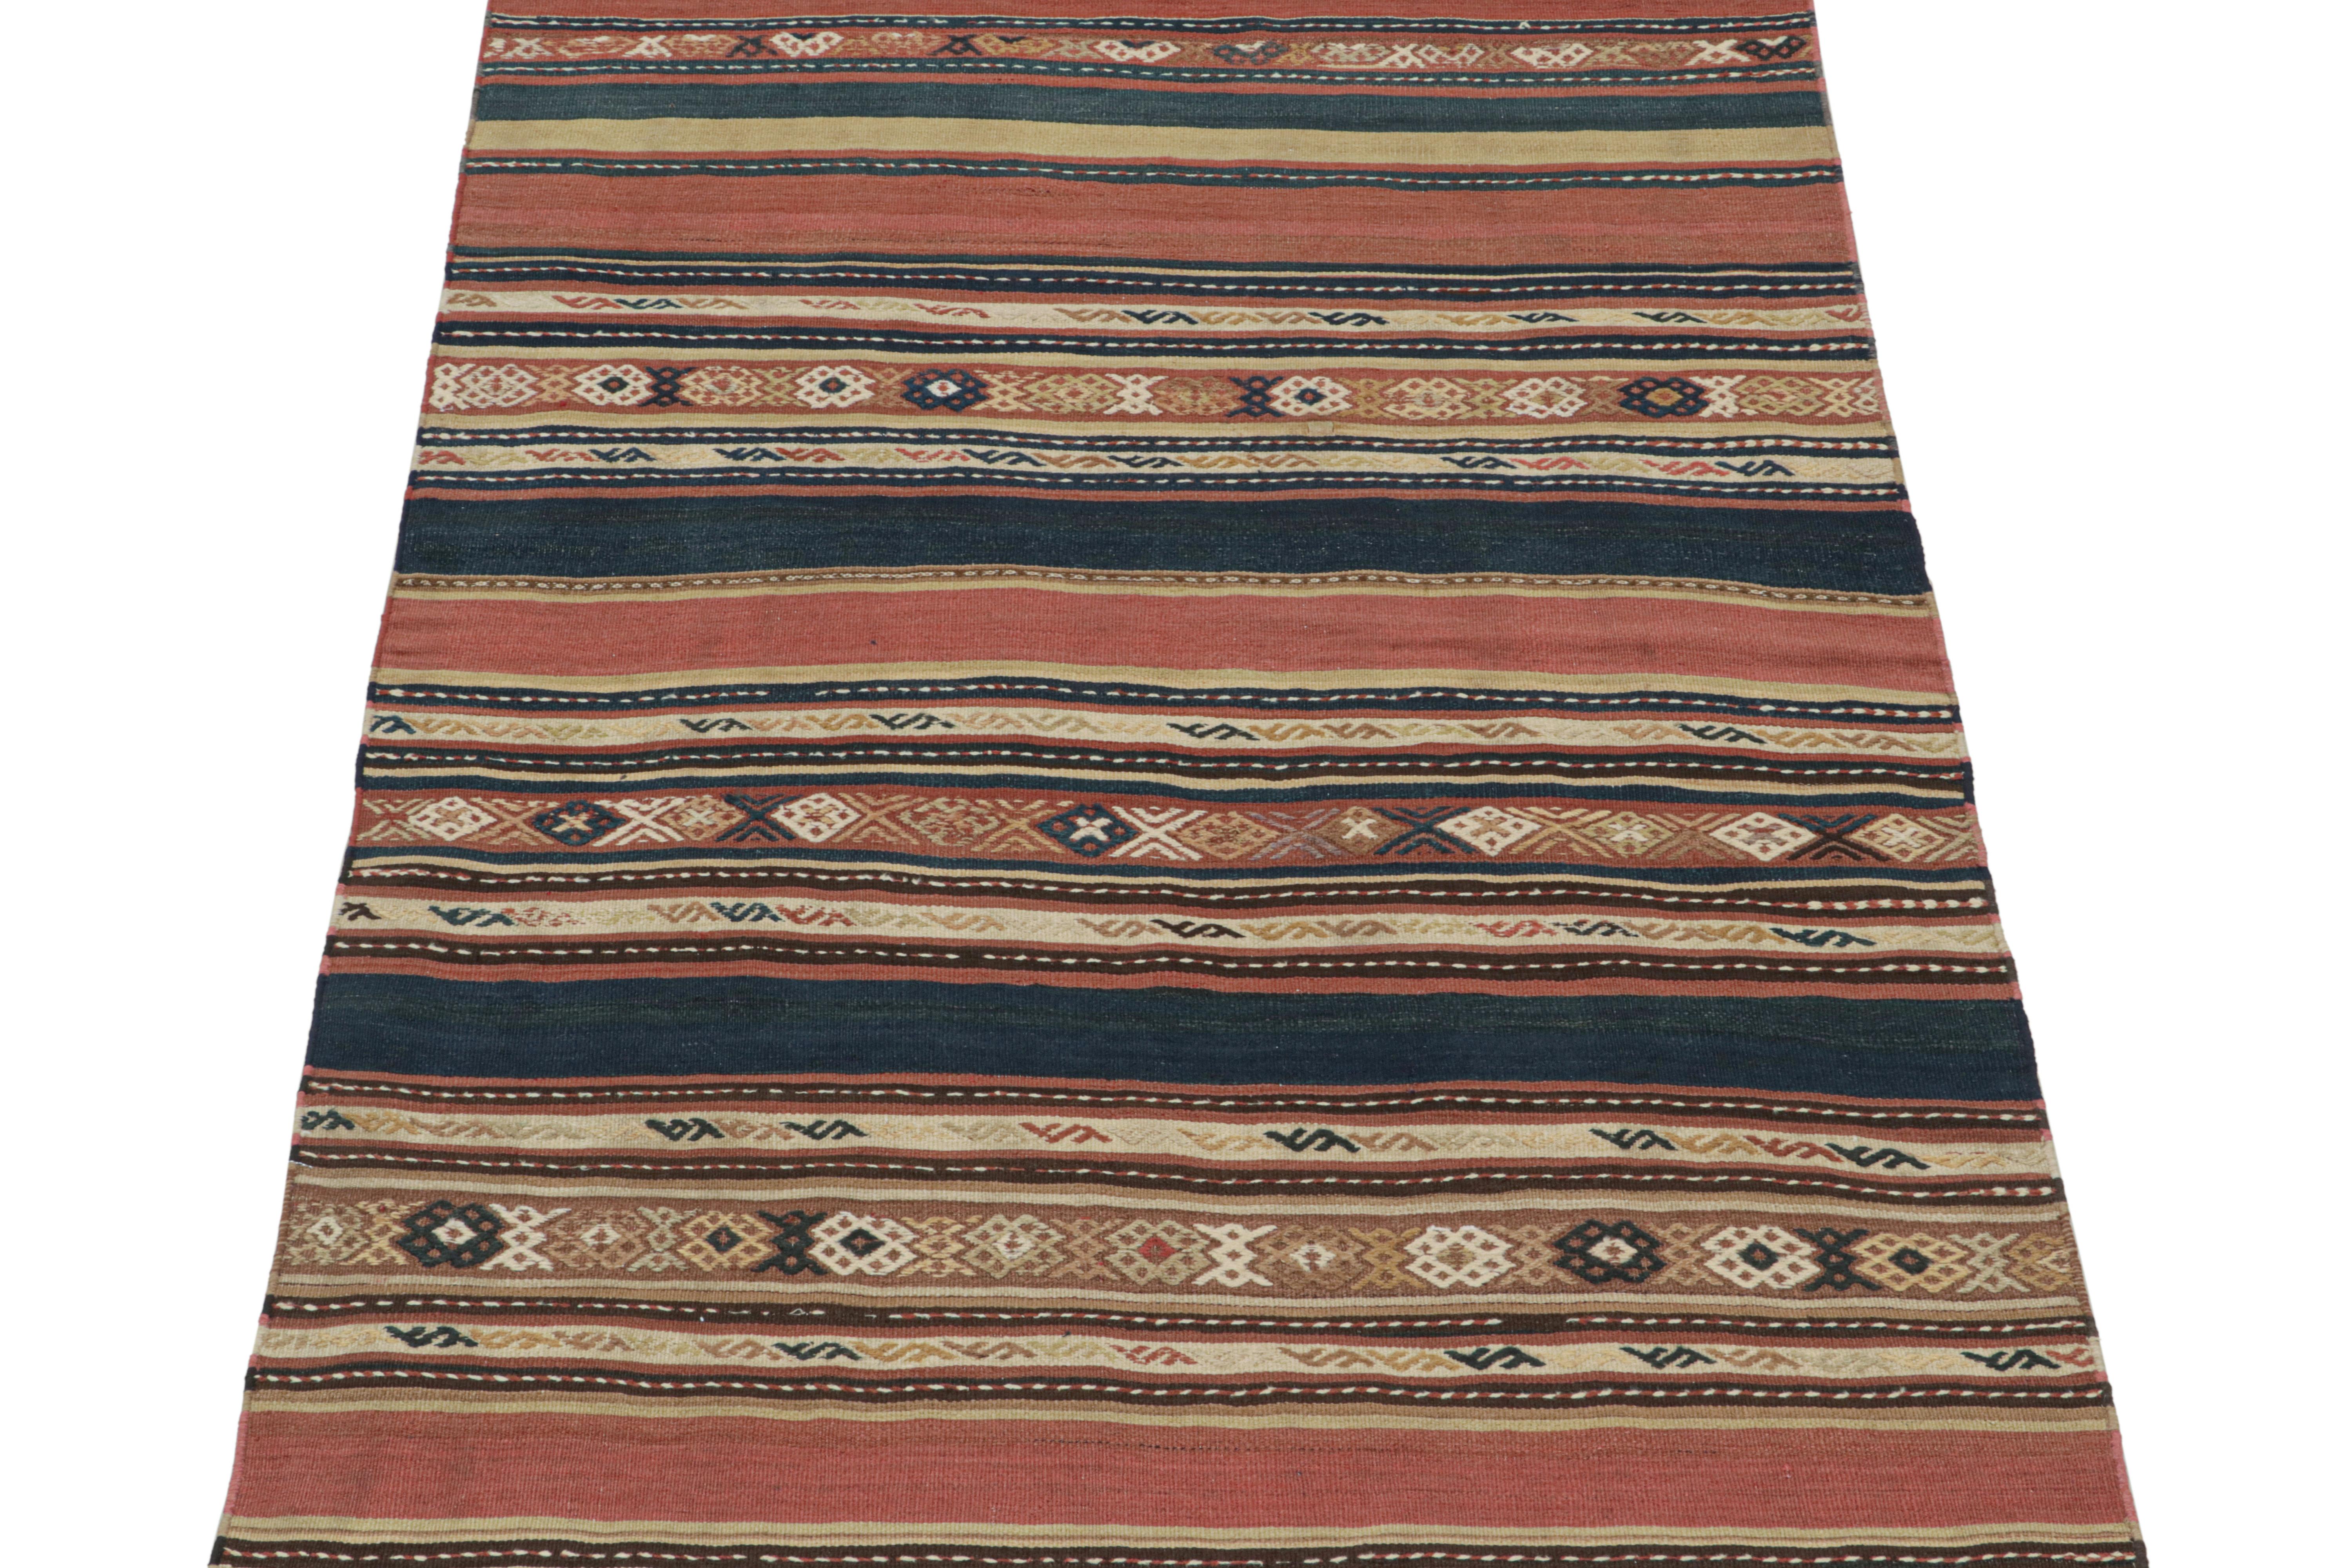 This vintage 5x7 Persian Kilim is a midcentury rug believed to originate from the Shahsavan tribe circa 1950-1960. 

Handwoven in wool, its design favors stripes and traditional geometric patterns in salmon, navy blue and beige-brown tones. Keen